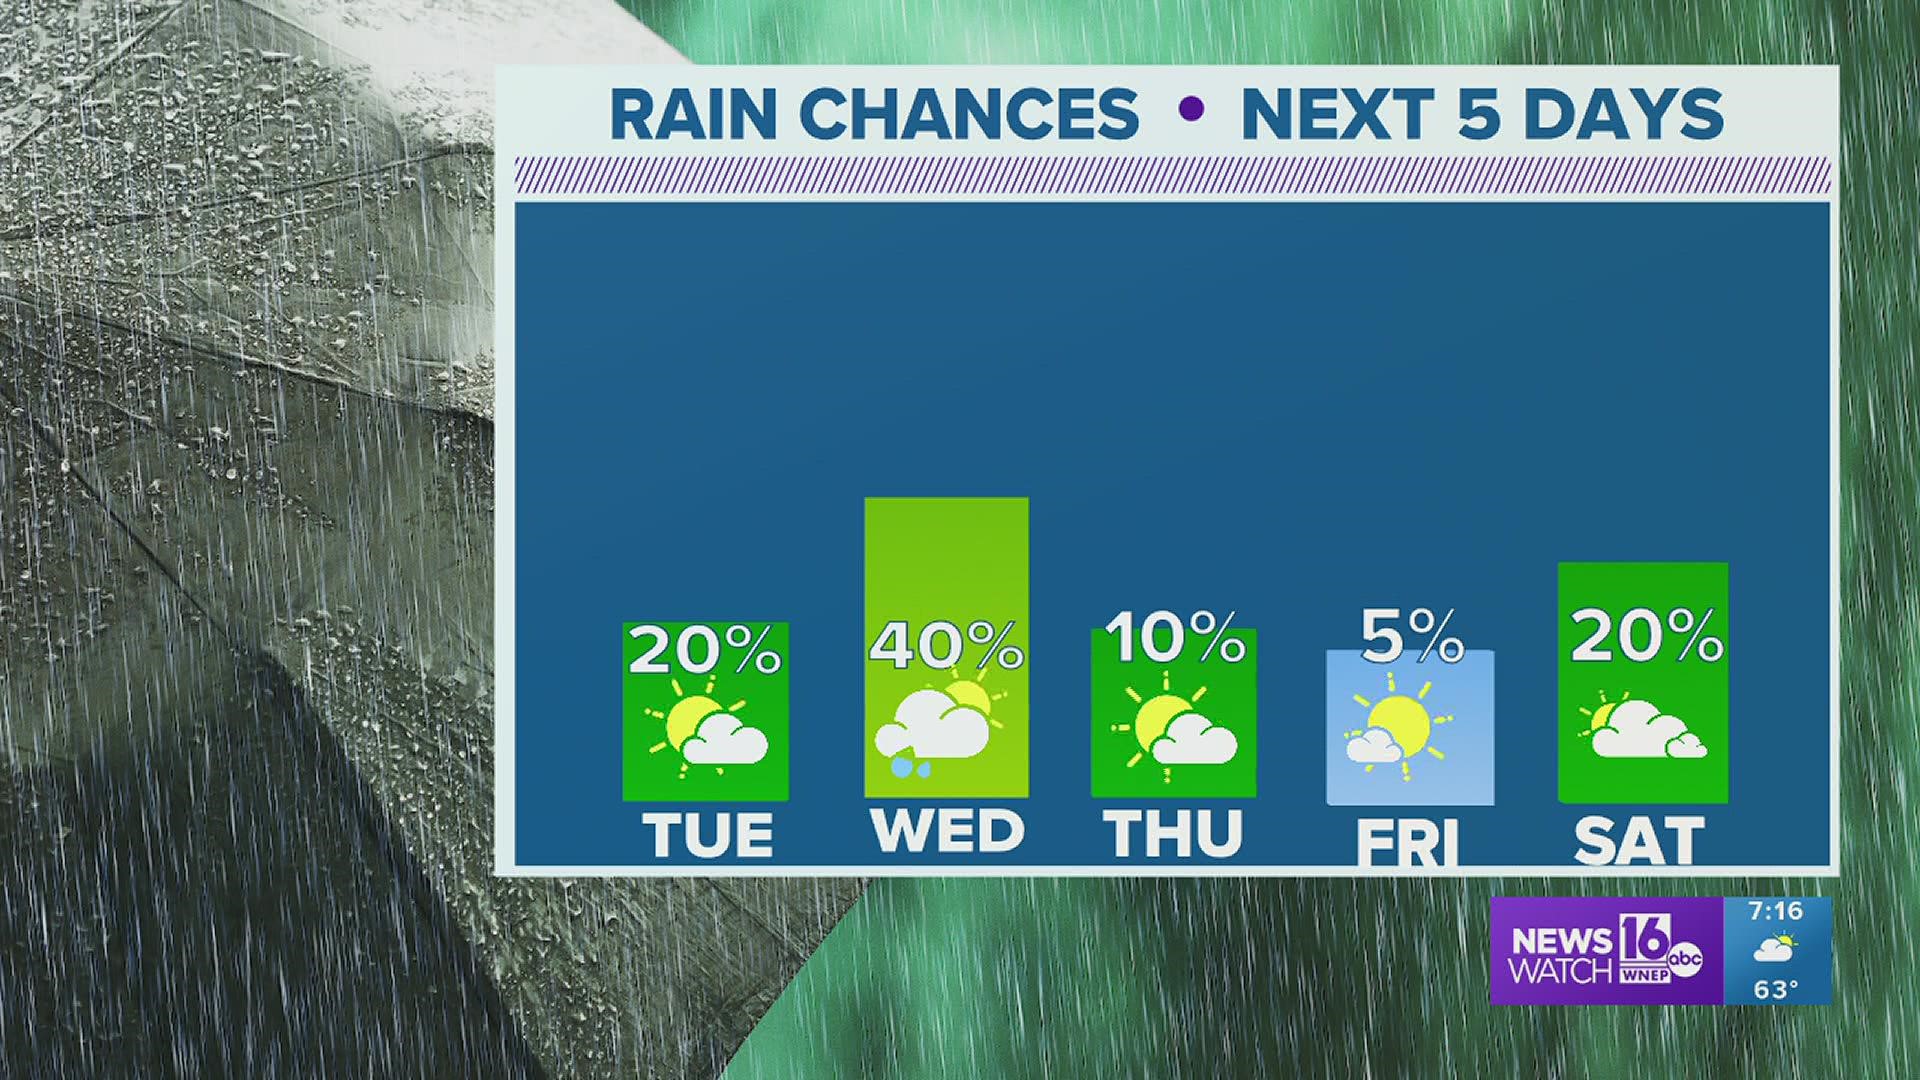 Expect a few more showers each day through Wednesday.